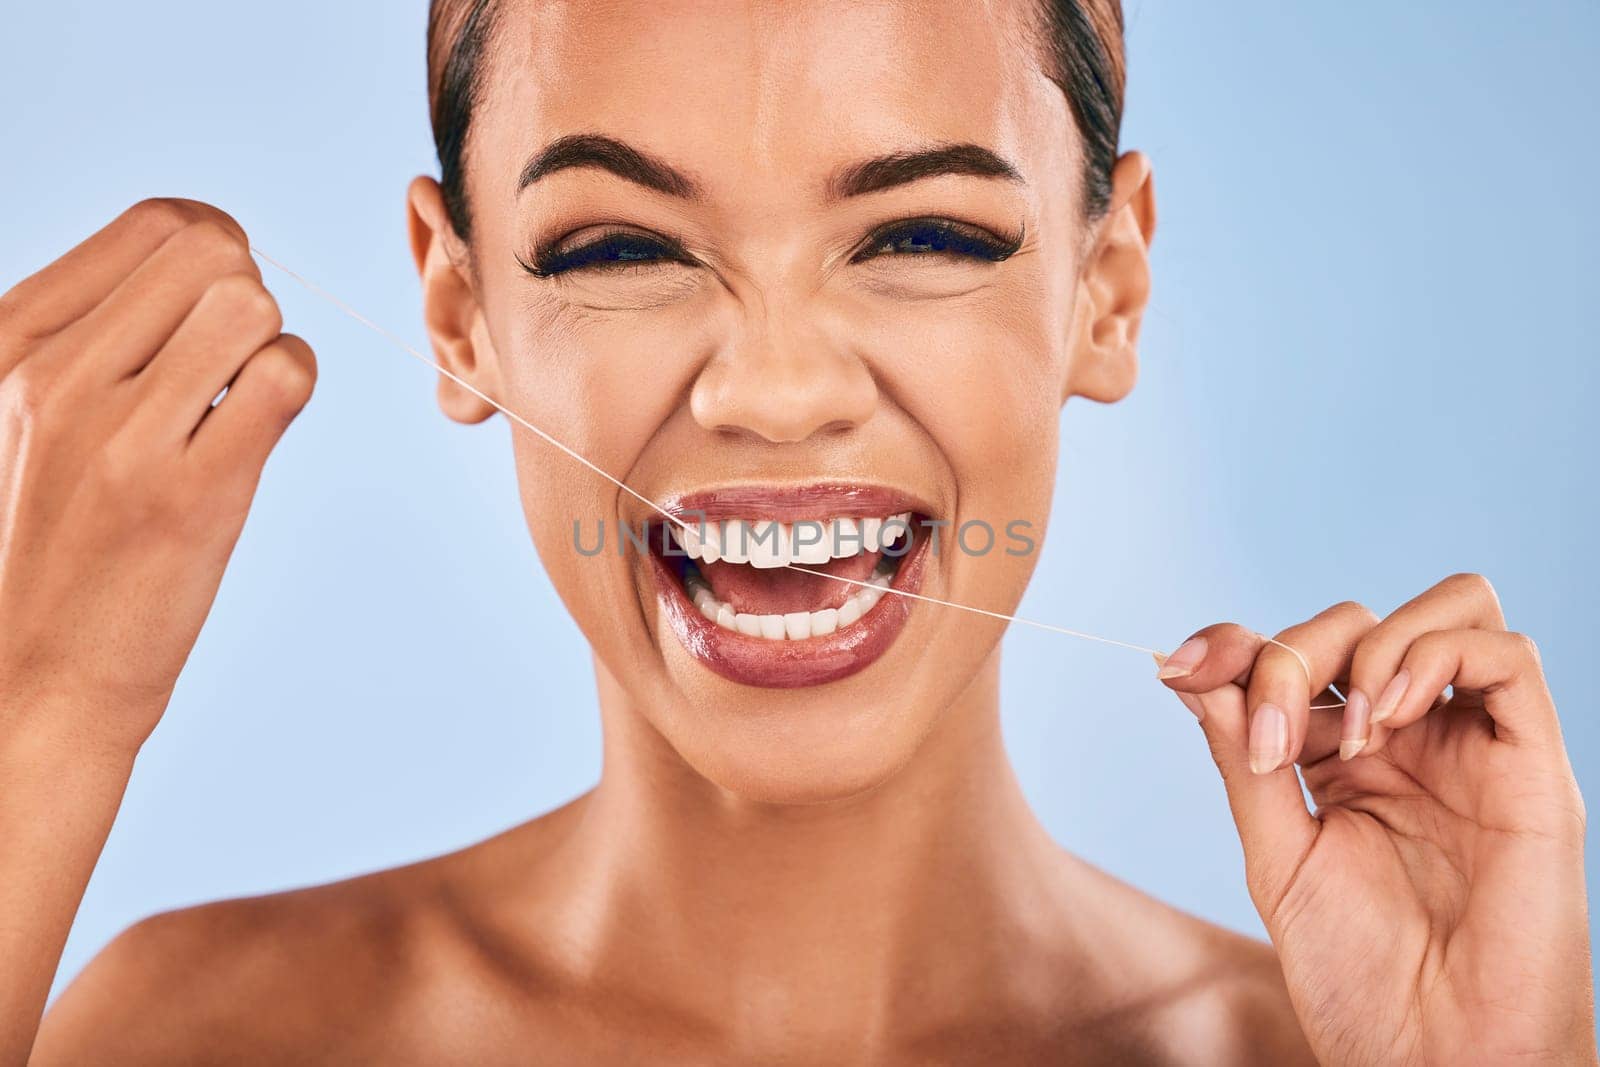 Happy woman, portrait and flossing teeth in dental, clean hygiene or healthcare against a studio background. Female person or model with smile in tooth whitening, floss or oral, gum or mouth cleaning.